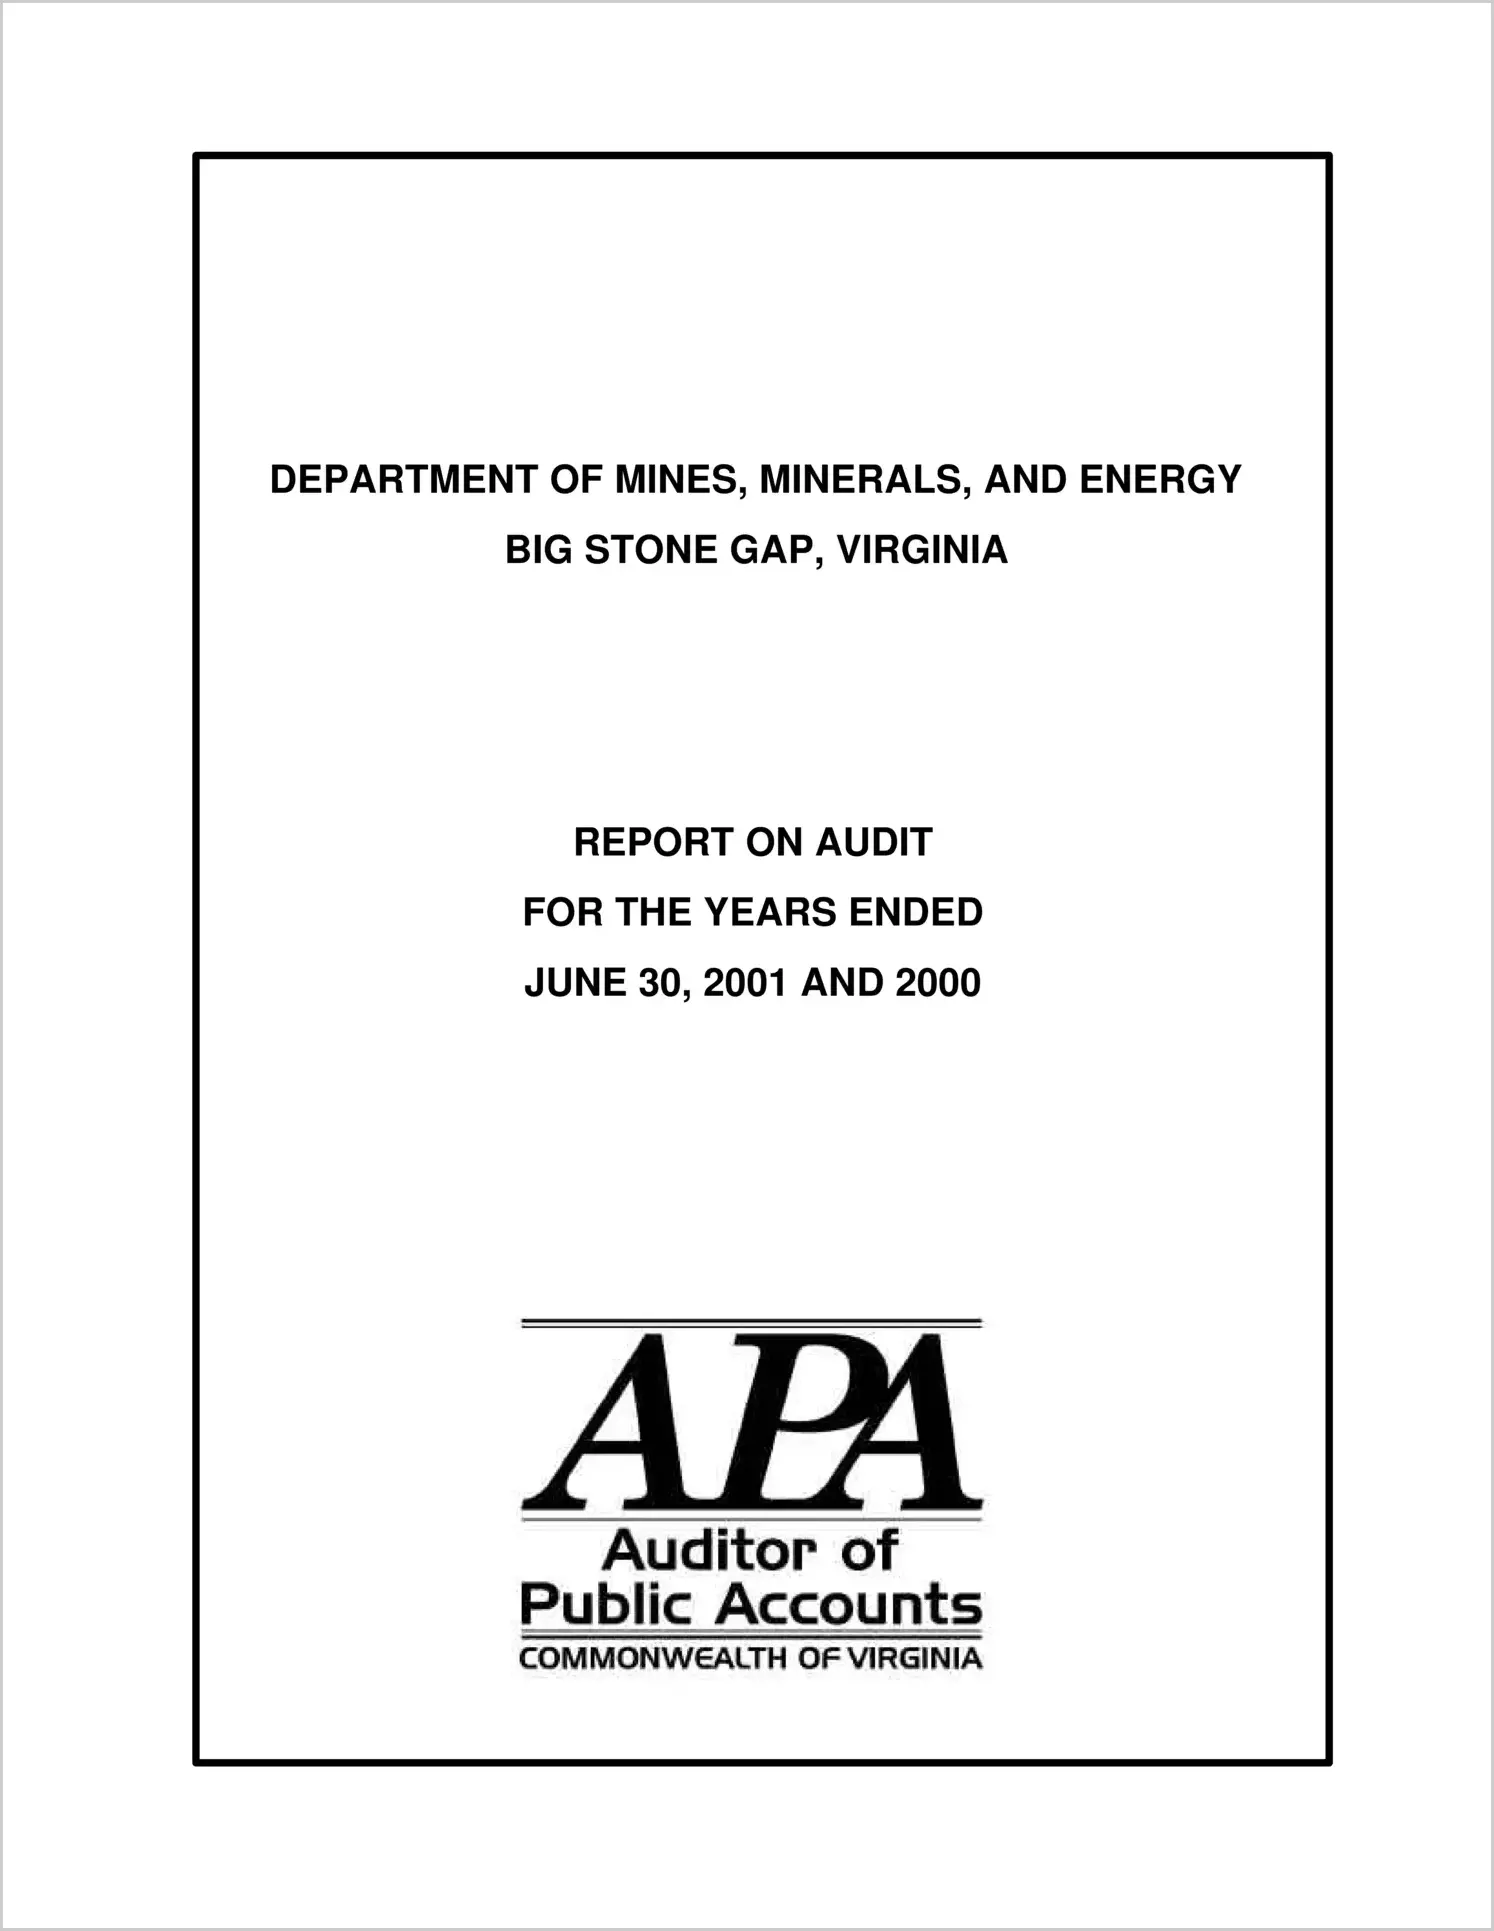 Department of Mines, Minerals, and Energy for the years ended June 30, 2001 and 2000